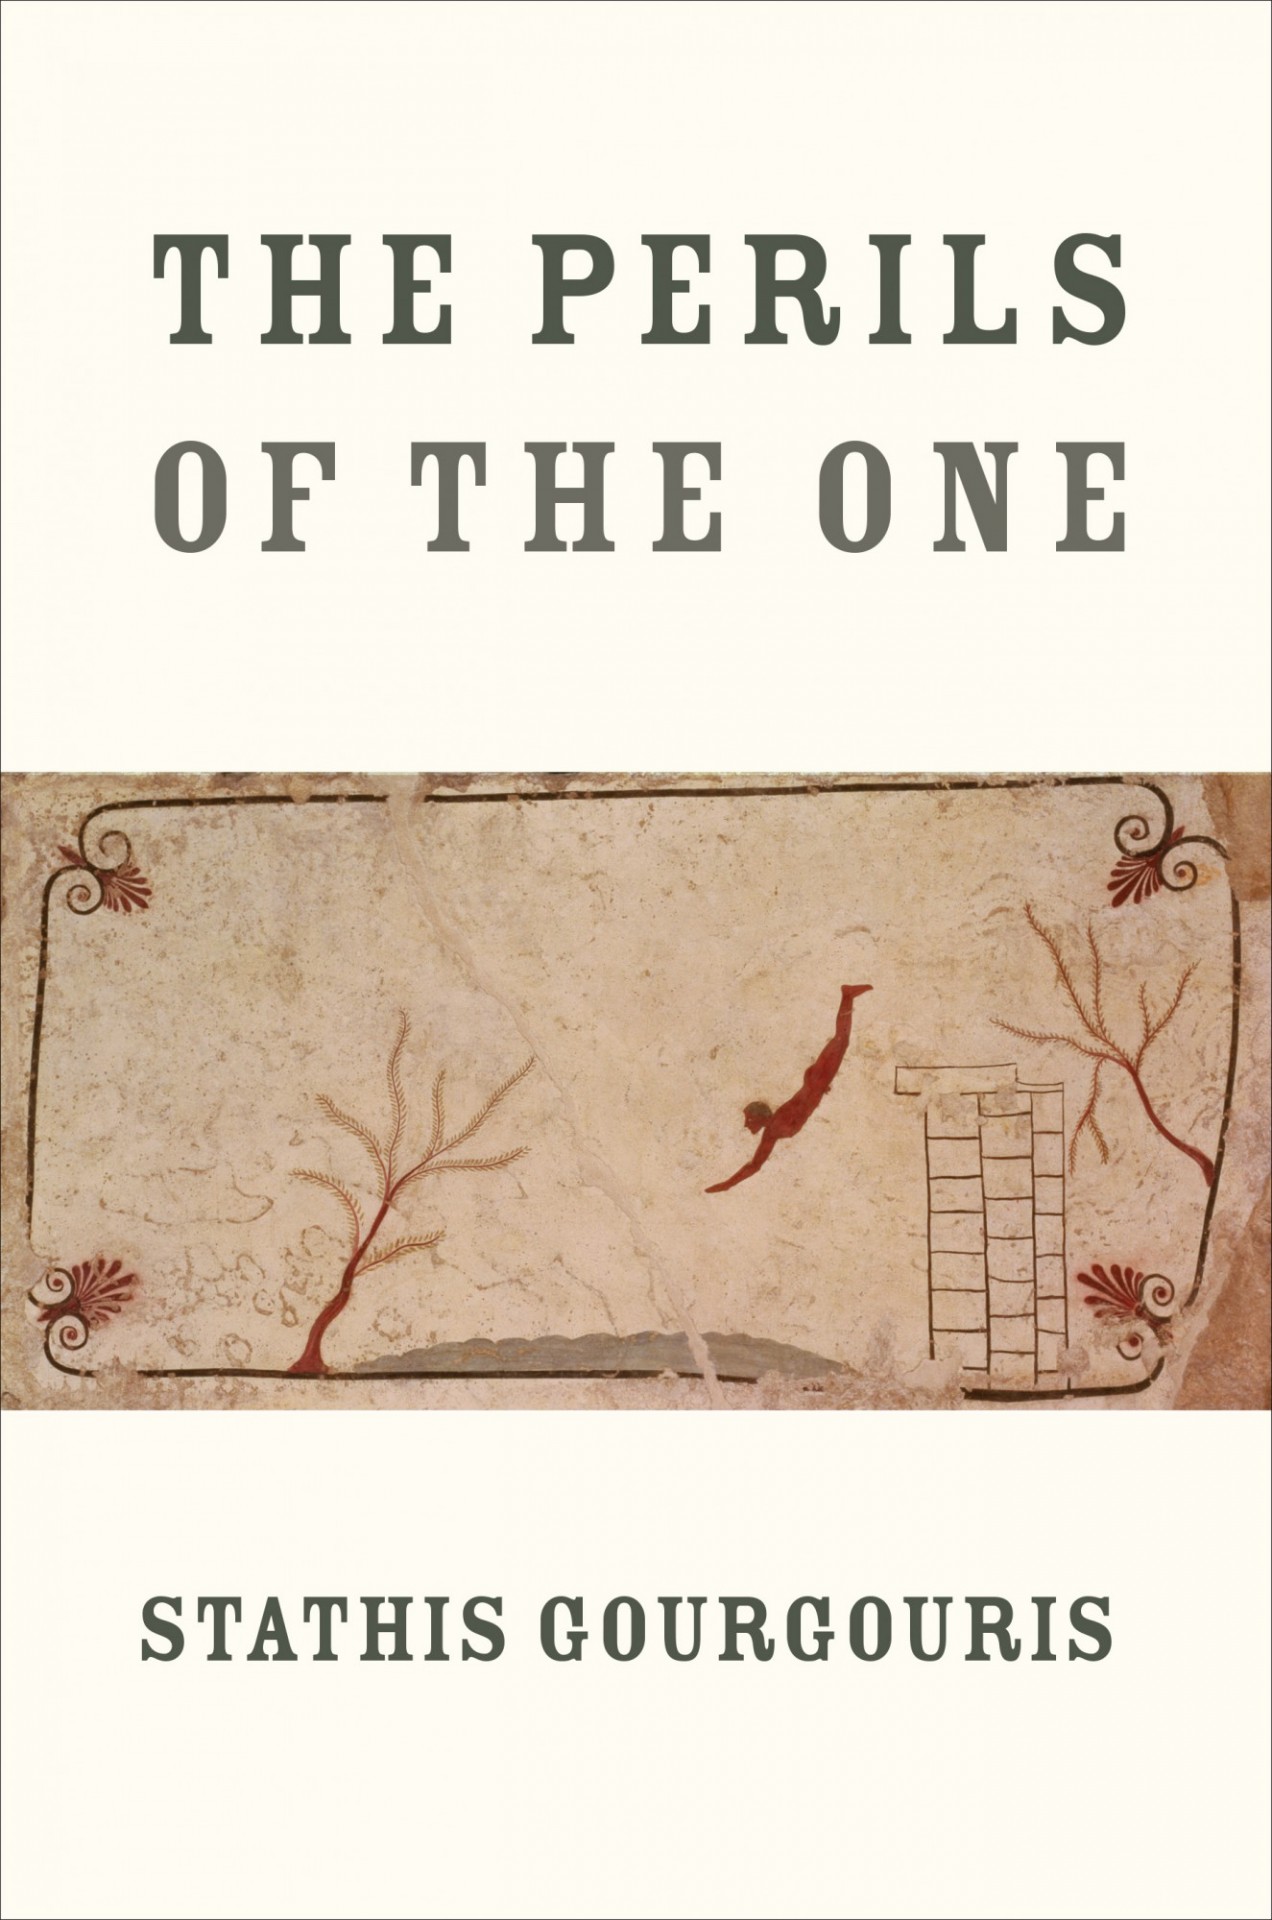 book cover image: The Perils of the One